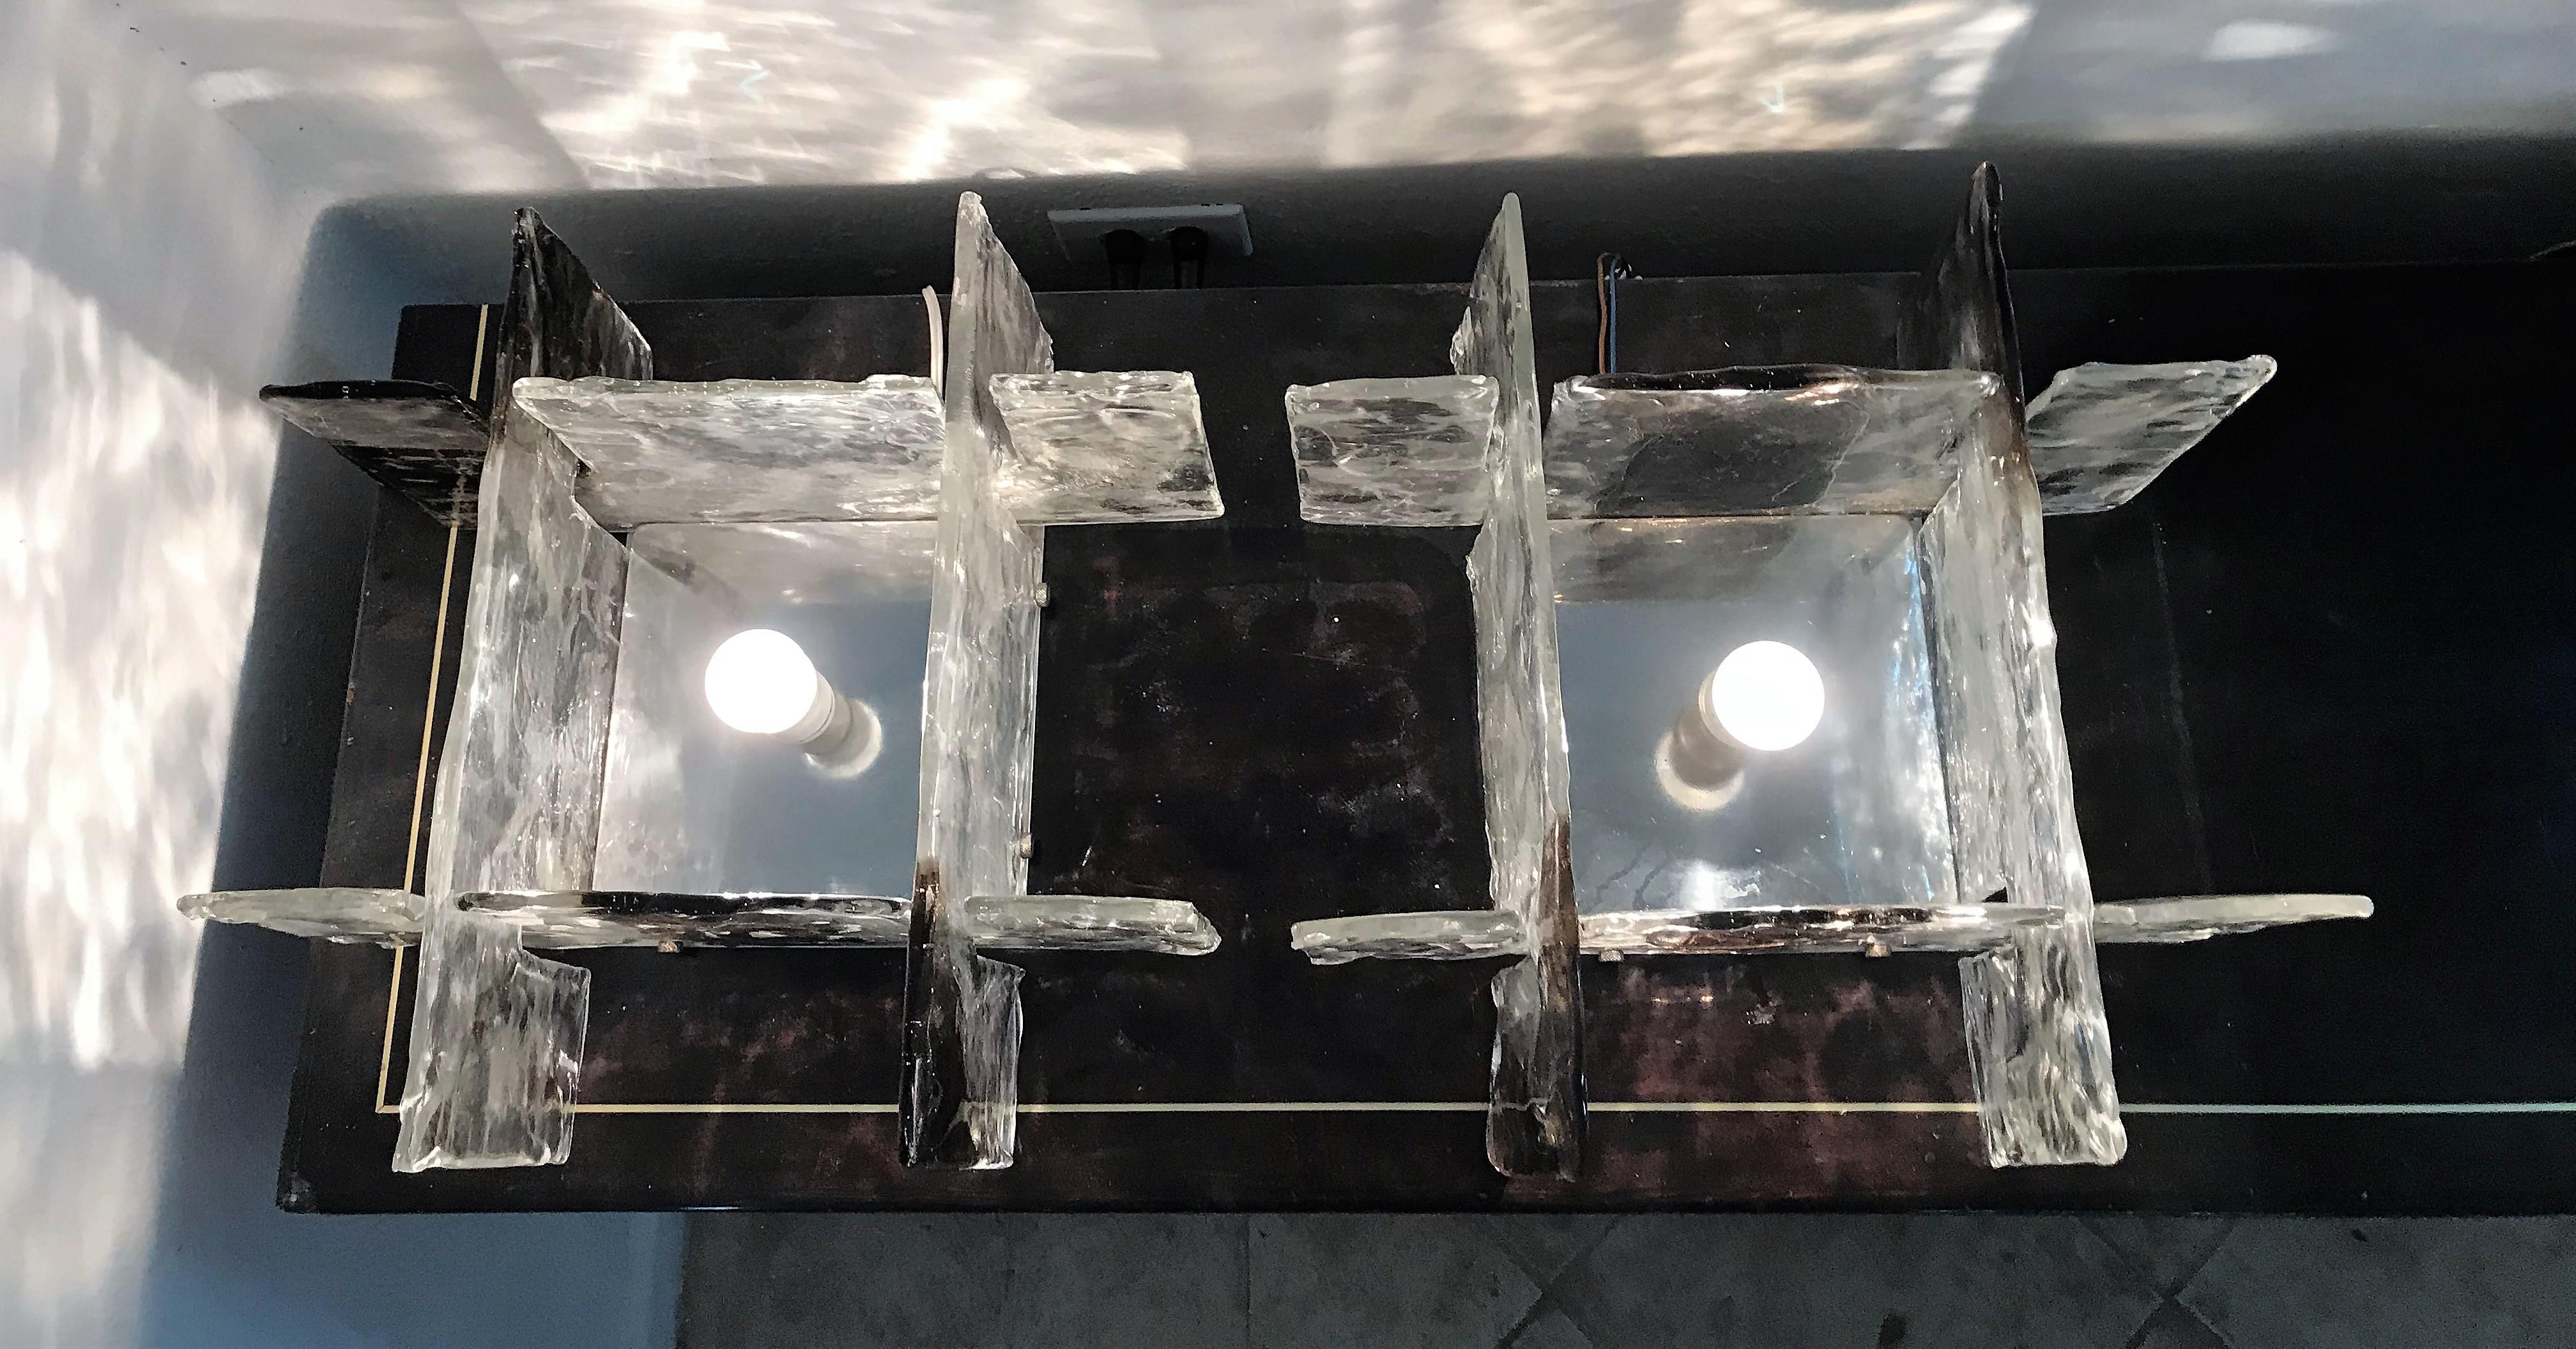 Pair of Mid-Century Modern sconces by Carlo Nason for Mazzega in clear and dark grey Murano glass.
Priced per pair.